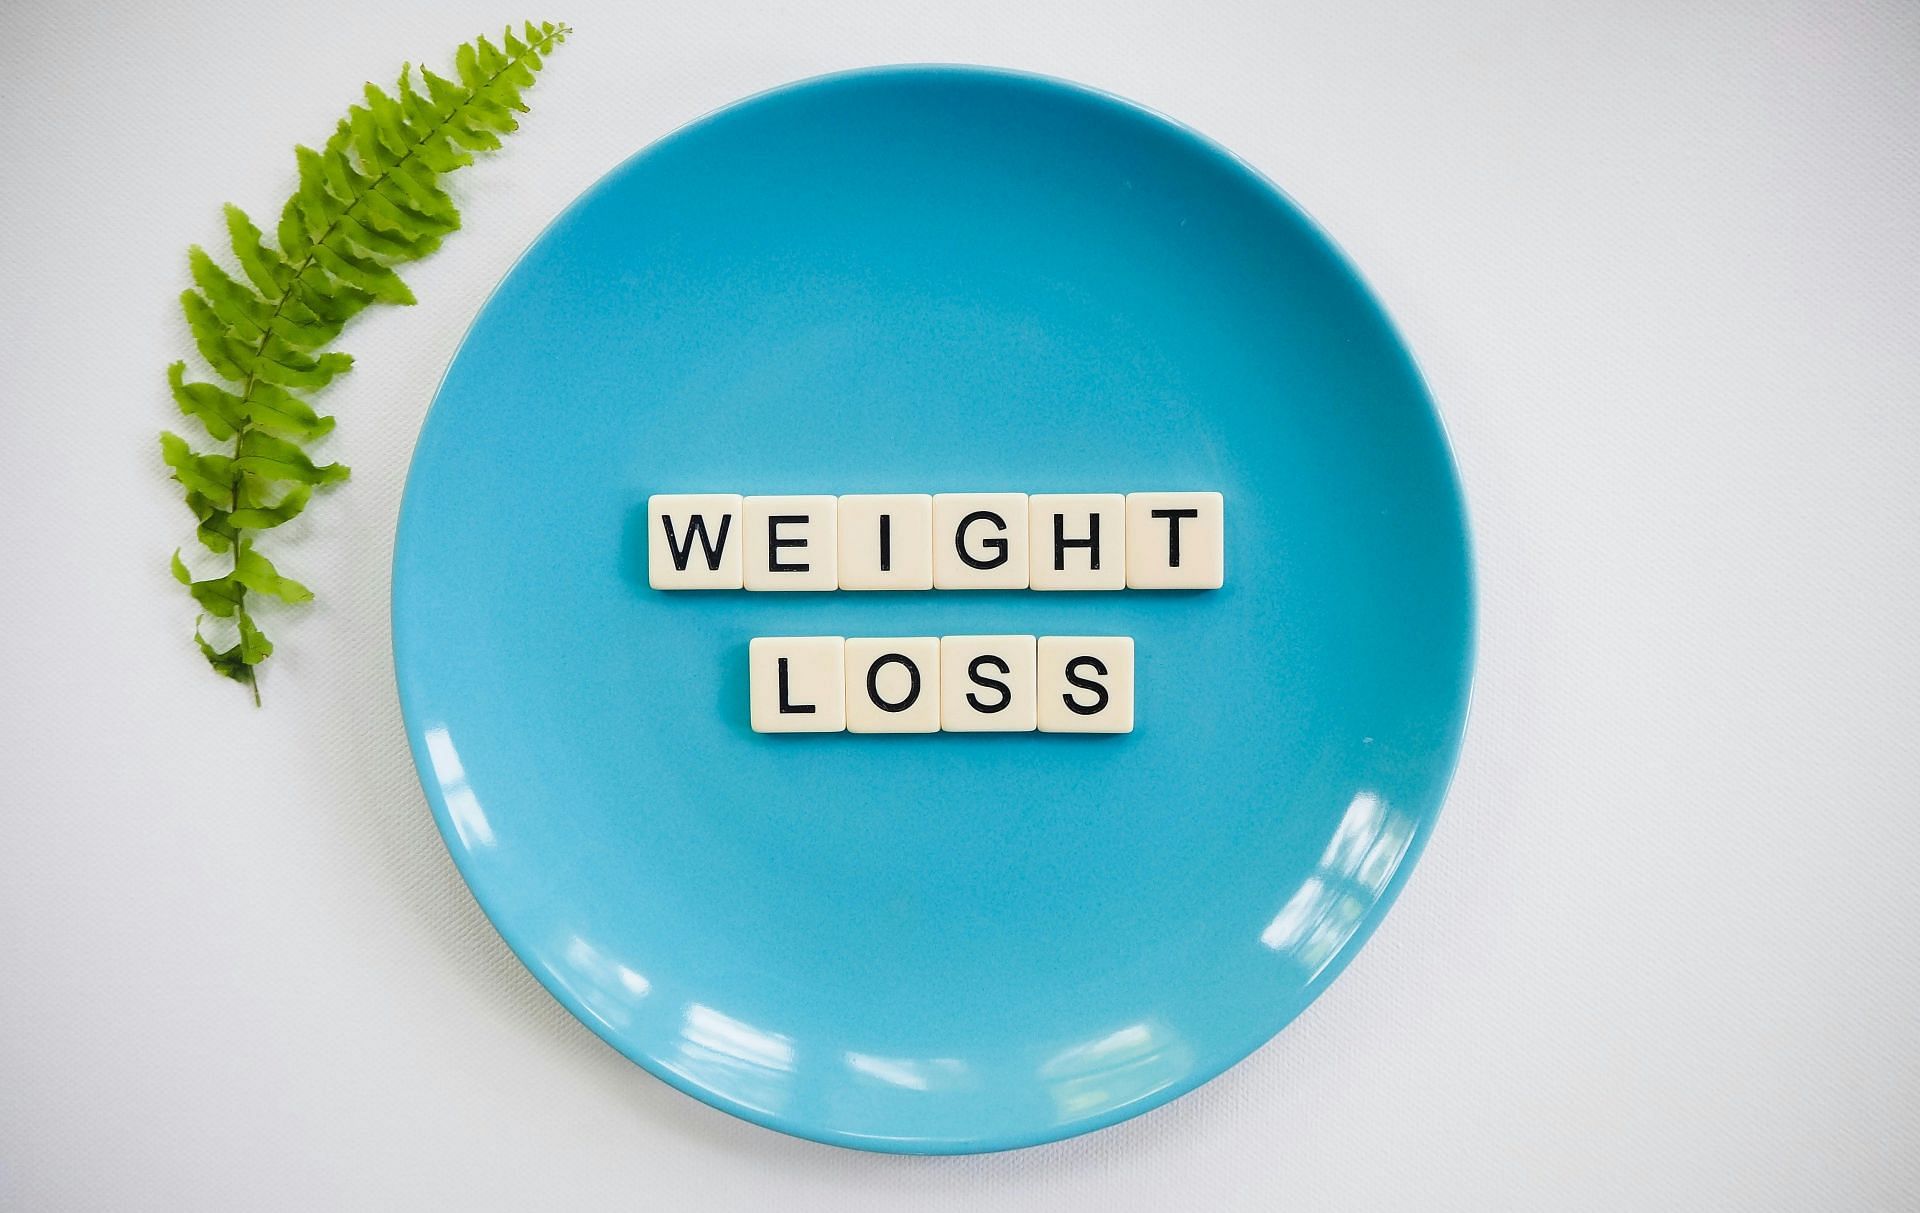 Chewing ginger or eating ginger is linked to weight loss (Image by Total Shape/Unsplash)